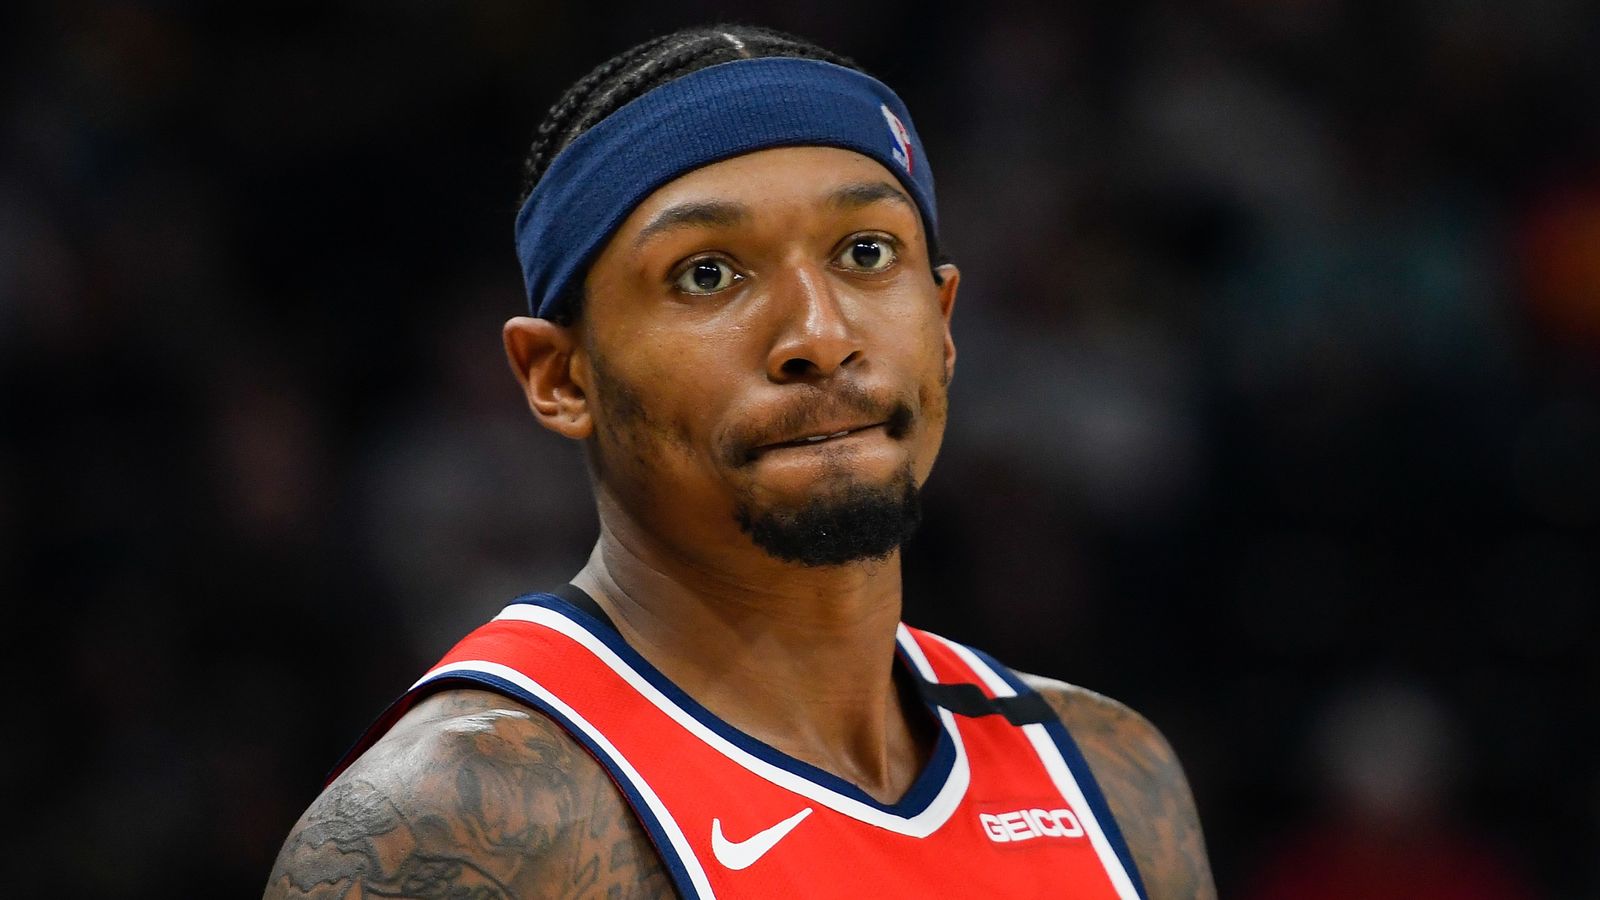 Bradley Beal Washington Wizards guard out of NBA restart with injury